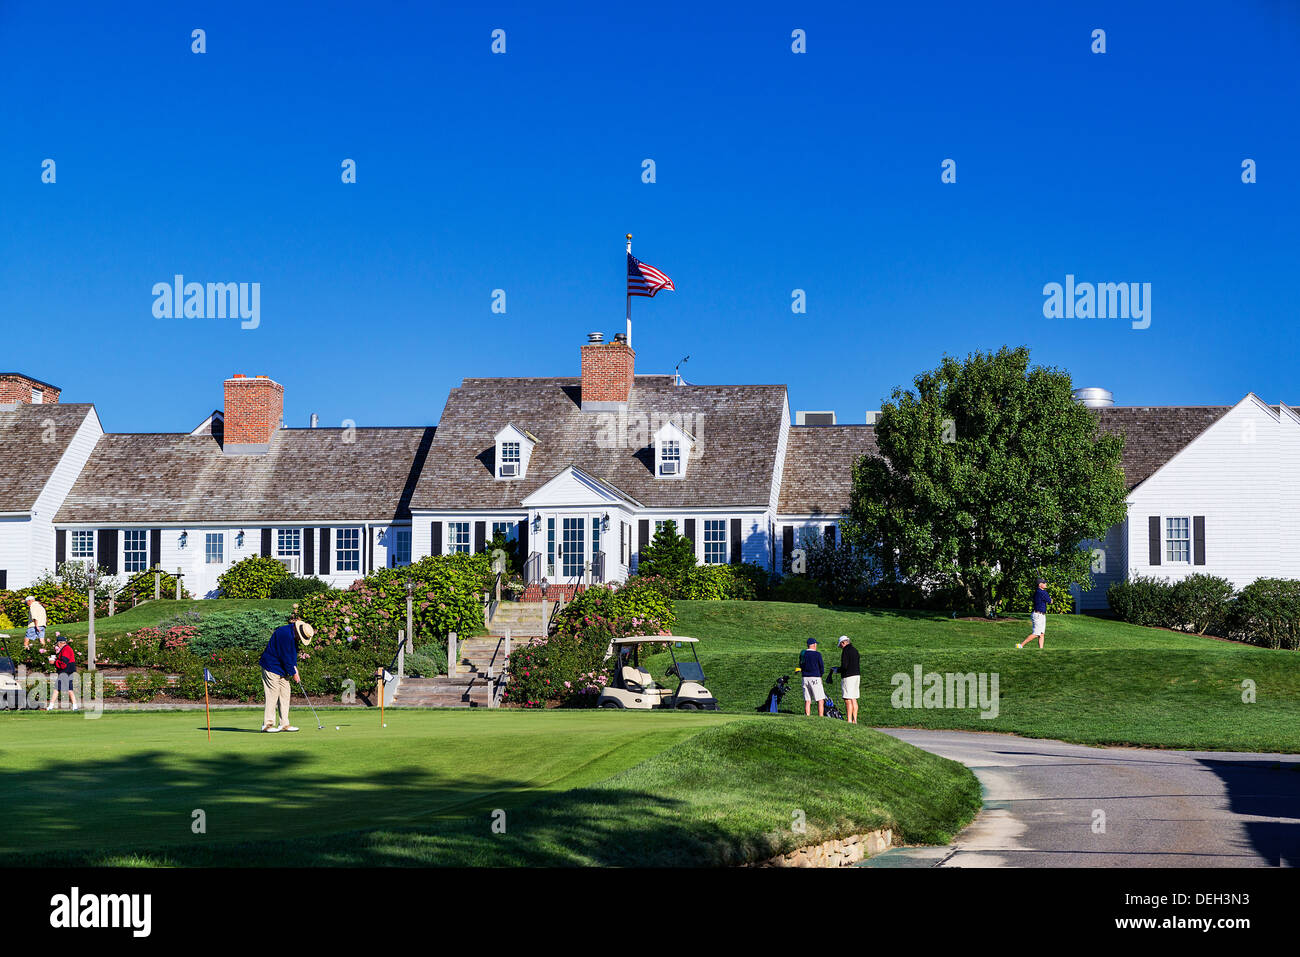 Golf club house, practice green et tee off, vers l'Ho, Chatham, Cape Cod, Massachusetts, USA Banque D'Images